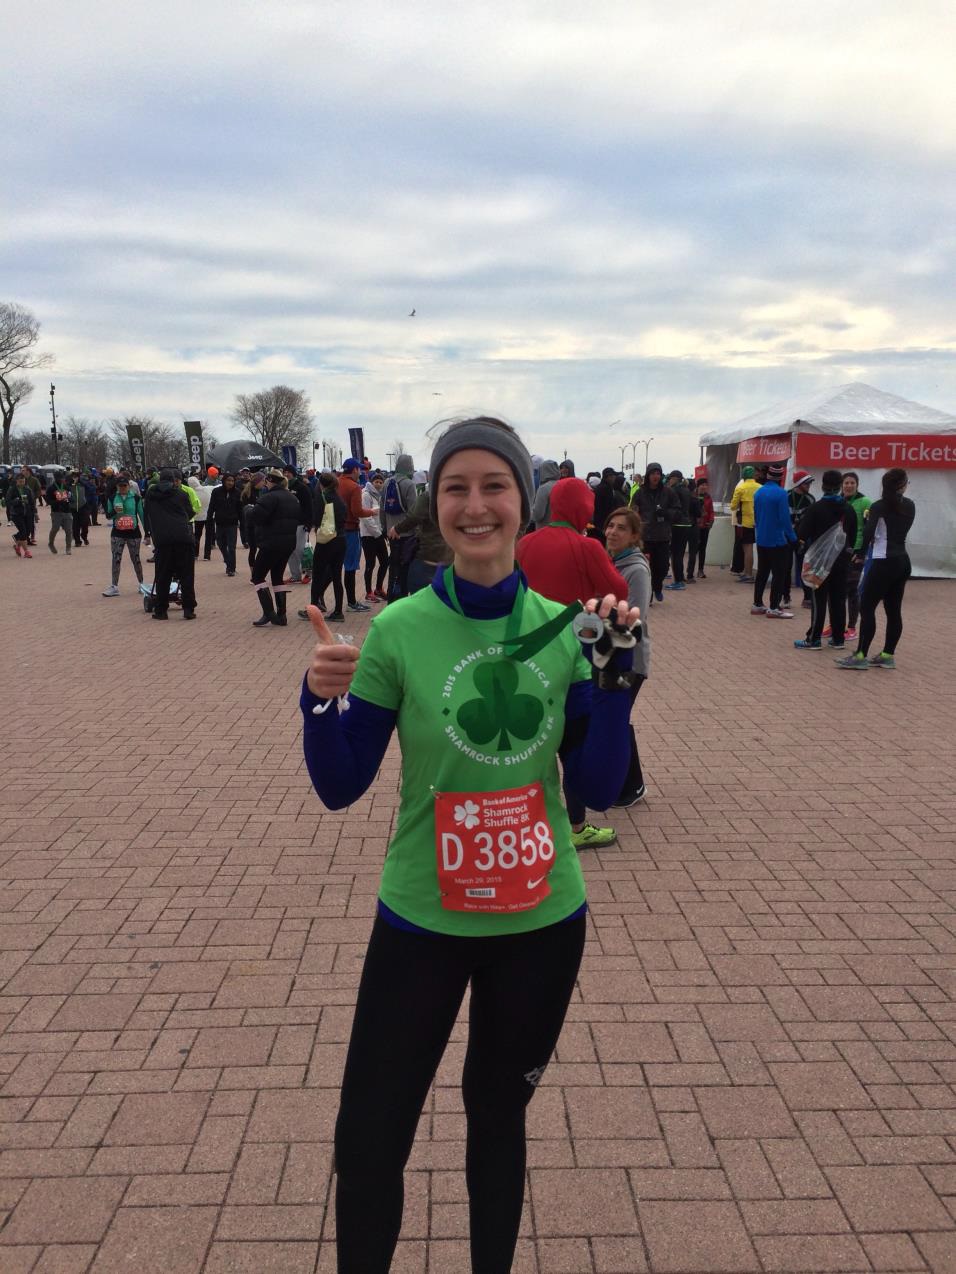 Chicago is full of fun runs of all distances. The Hot Chocolate and Shamrock Shuffle were my favorites this year!